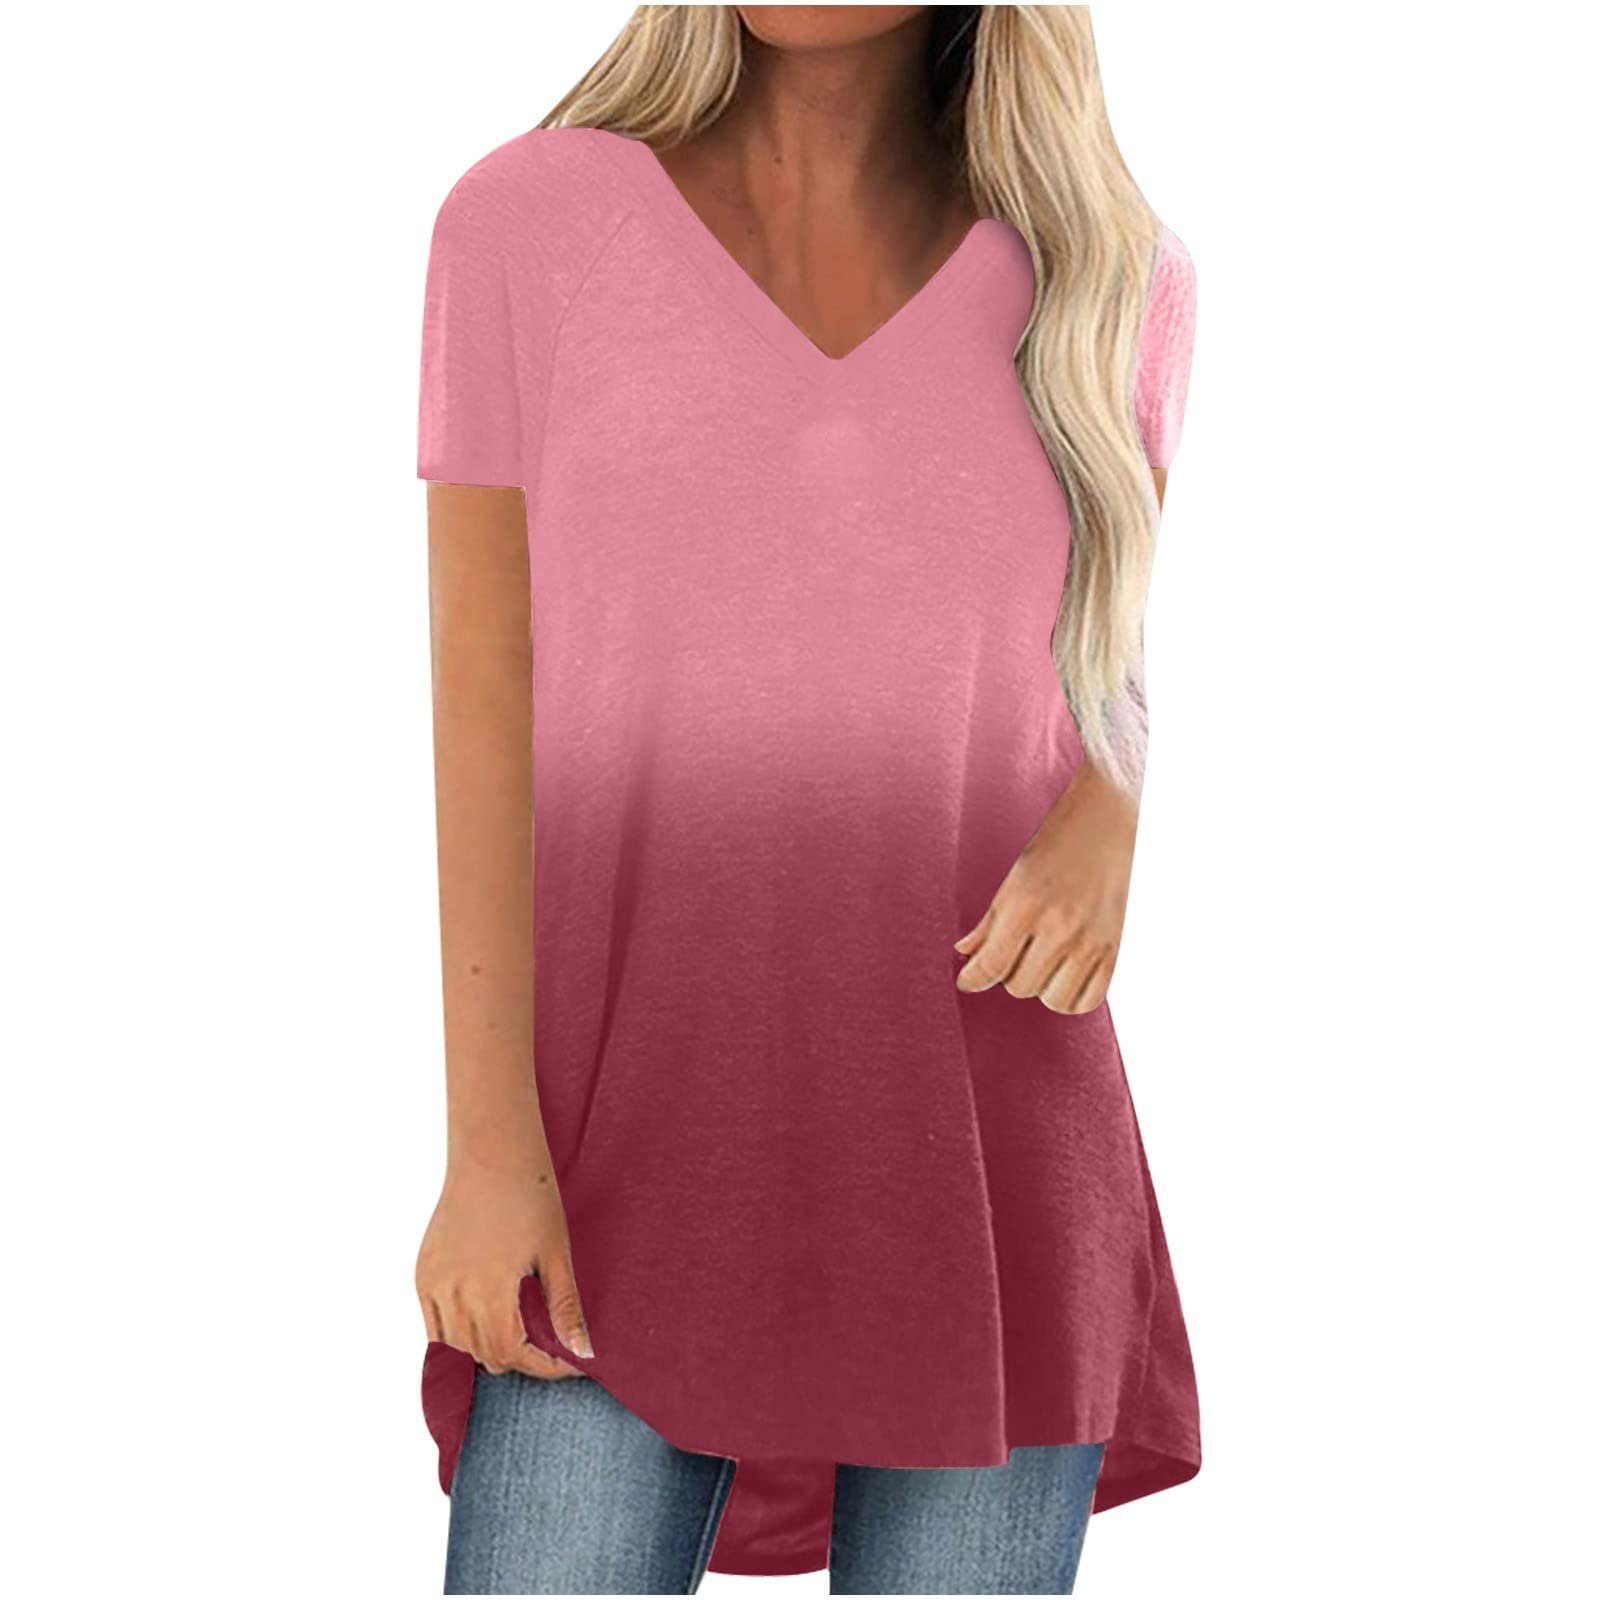 ABABC Women's Tops for Leggings,Dressy Casual Ombre Print V-Neck T